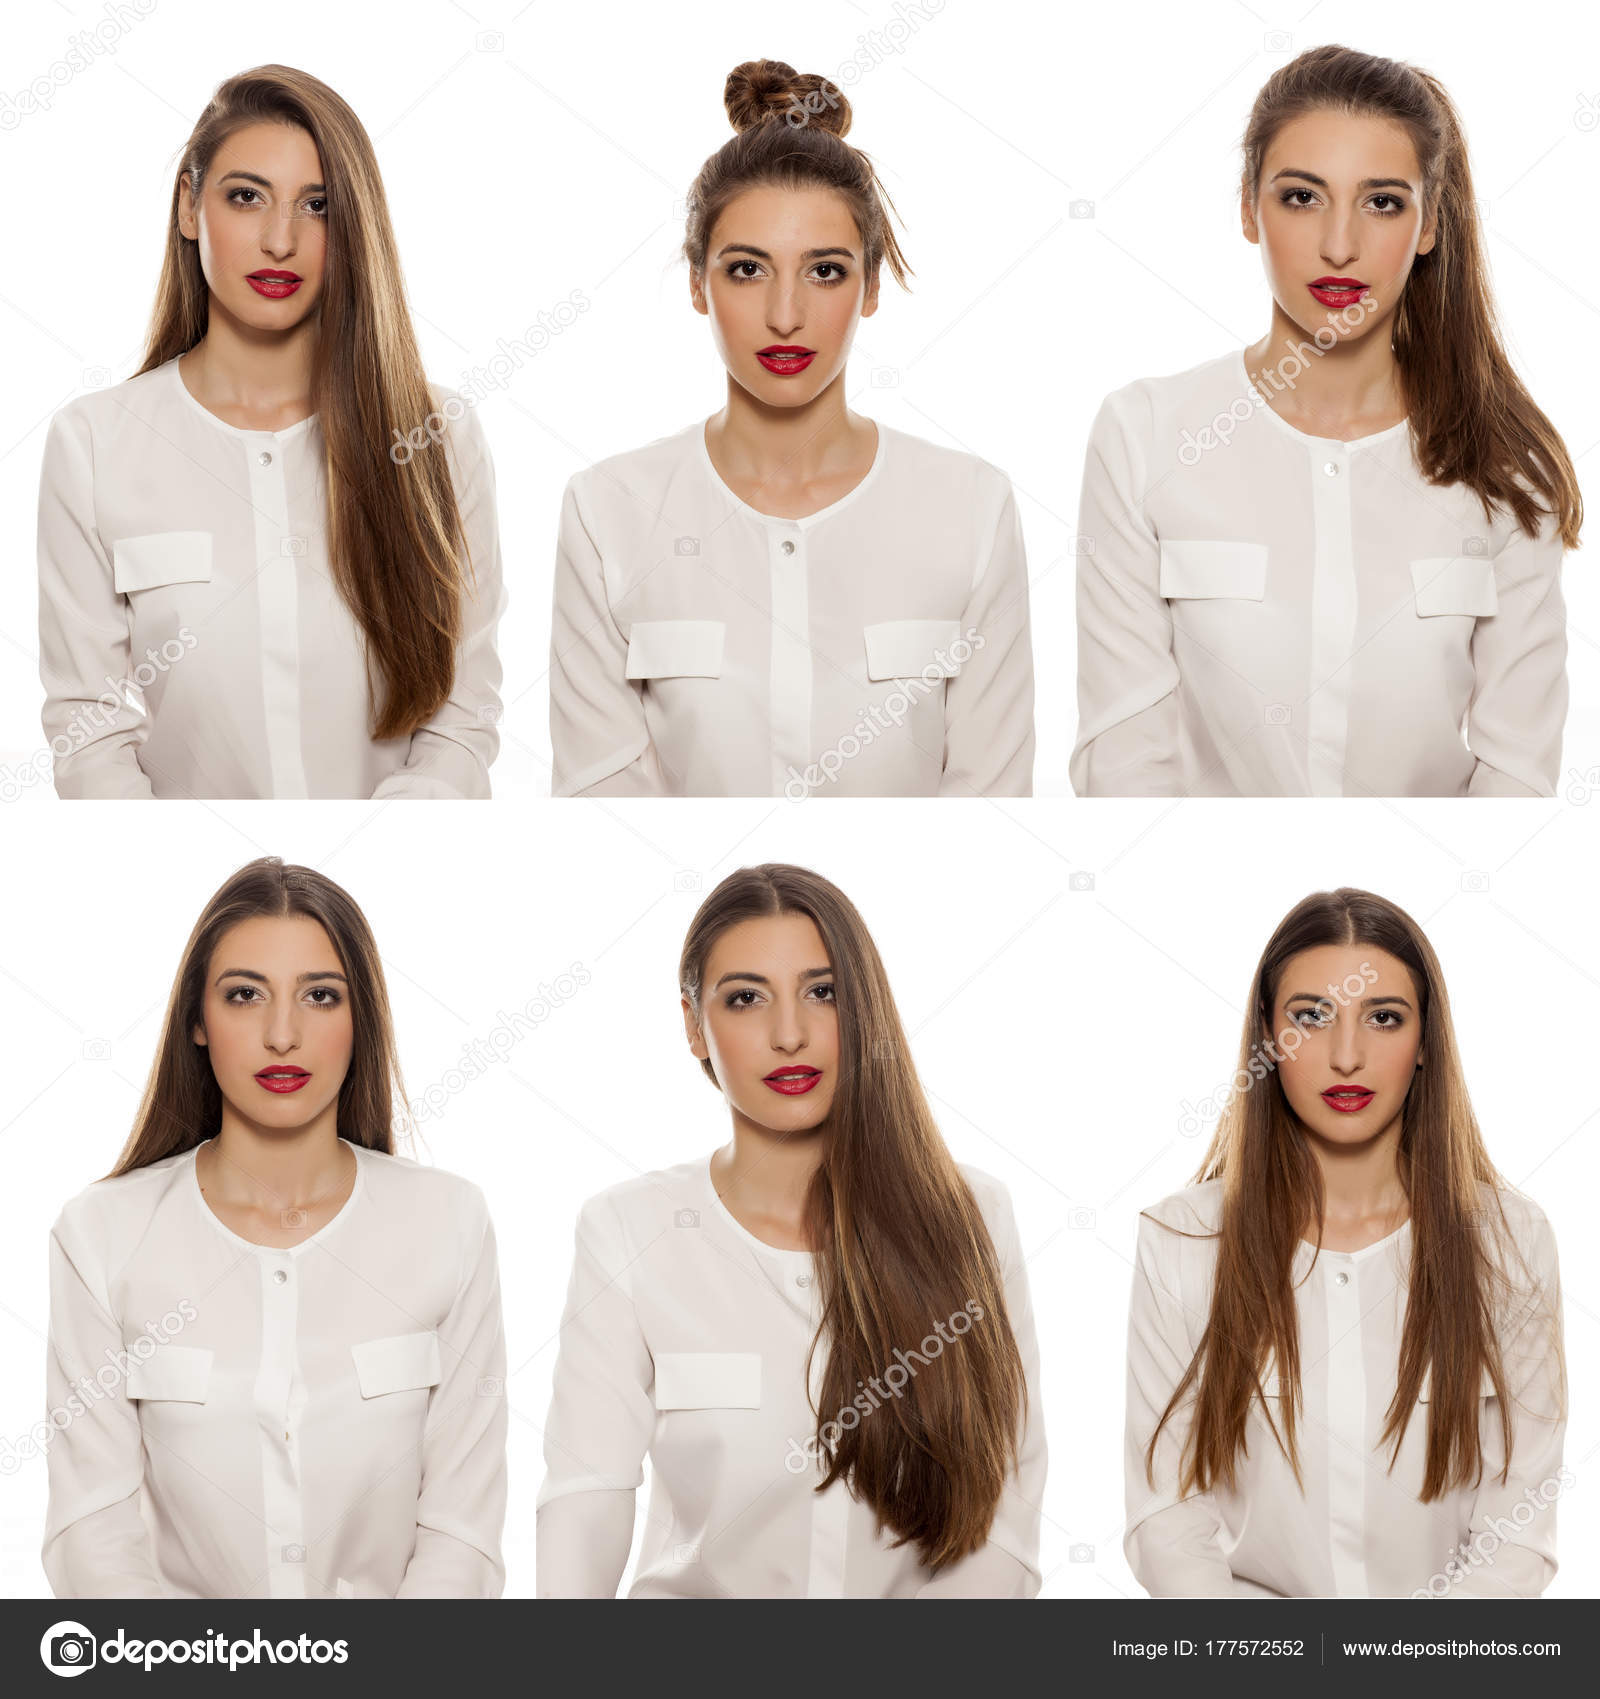 Pictures Same Girl Different Six Portraits Same Girl